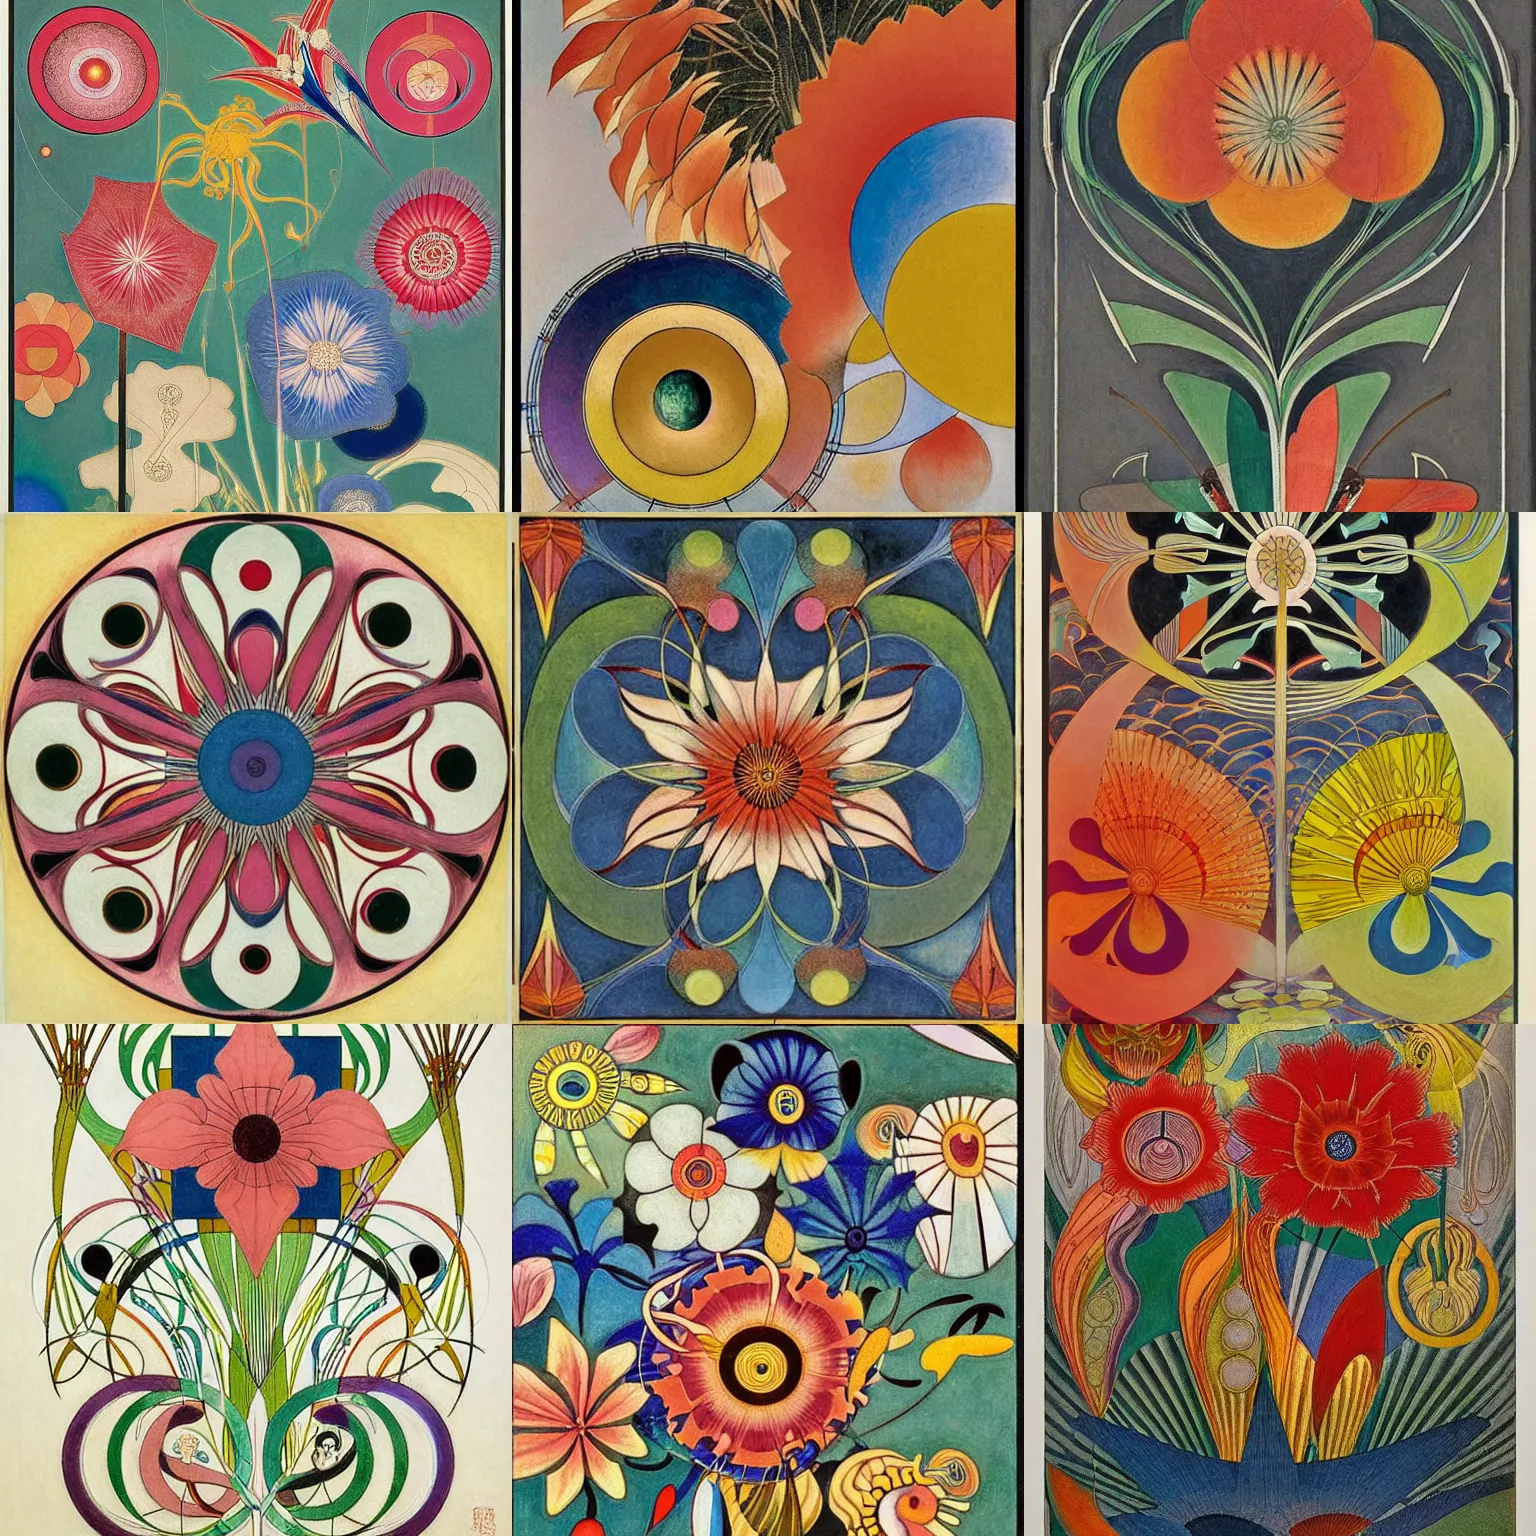 Prompt: flower ( ( art nouveau ) ) ( ( bauhaus ) ), intricate detail, sharp focus, colorful, by ( ( hilma af klint ) ) and escher and hokusai and ( botticelli ) and frank lloyd wright and ( ( james jean ) ) and ( hr geiger ) and ( kandinsky )